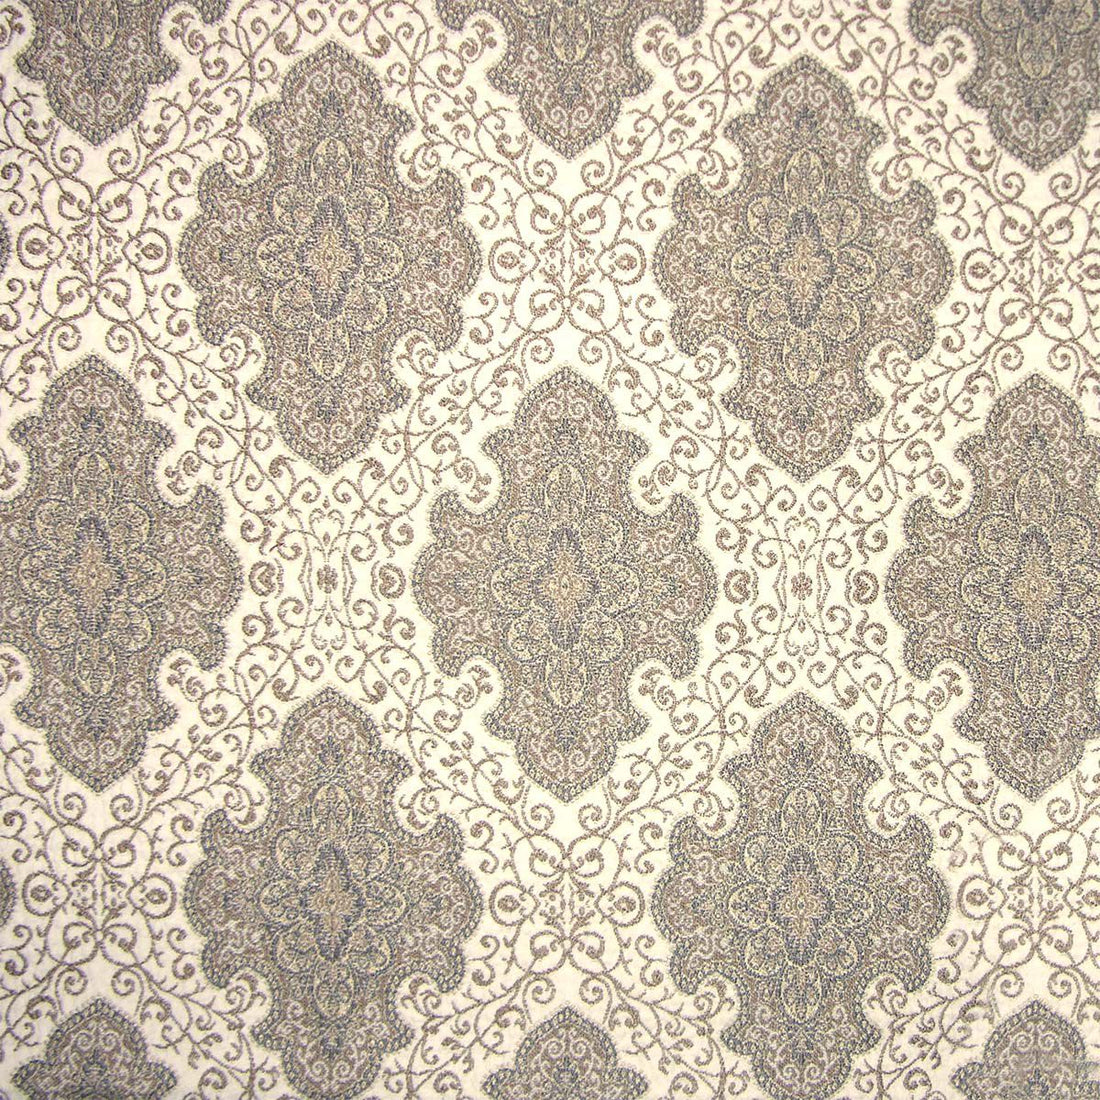 Amaya fabric in ivory multi color - pattern number VW 0003F013 - by Scalamandre in the Old World Weavers collection